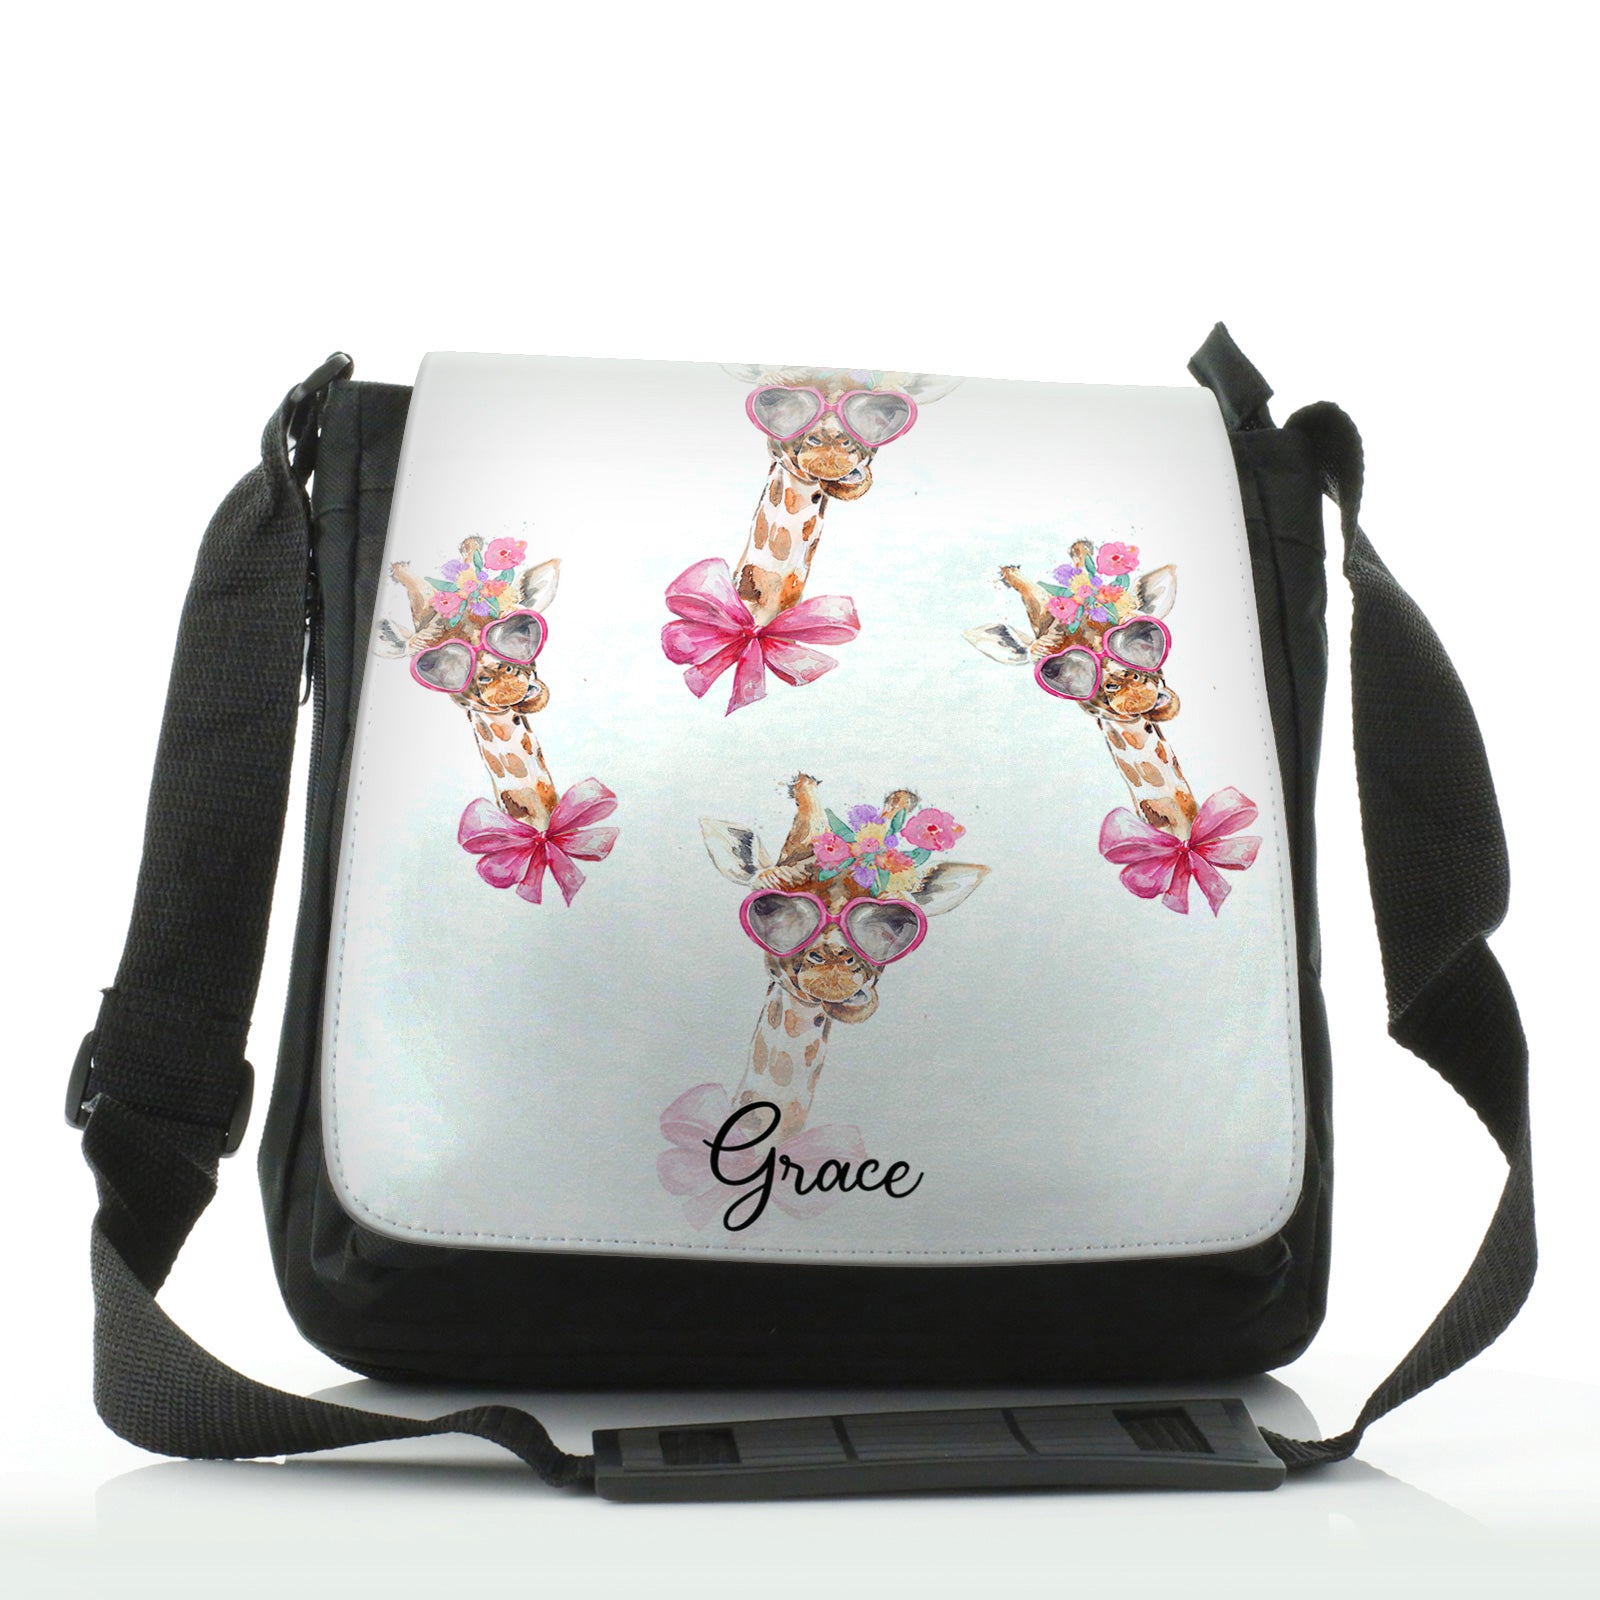 Personalised Shoulder Bag with Giraffe Pink Bow Multicolour Flowers and Cute Text